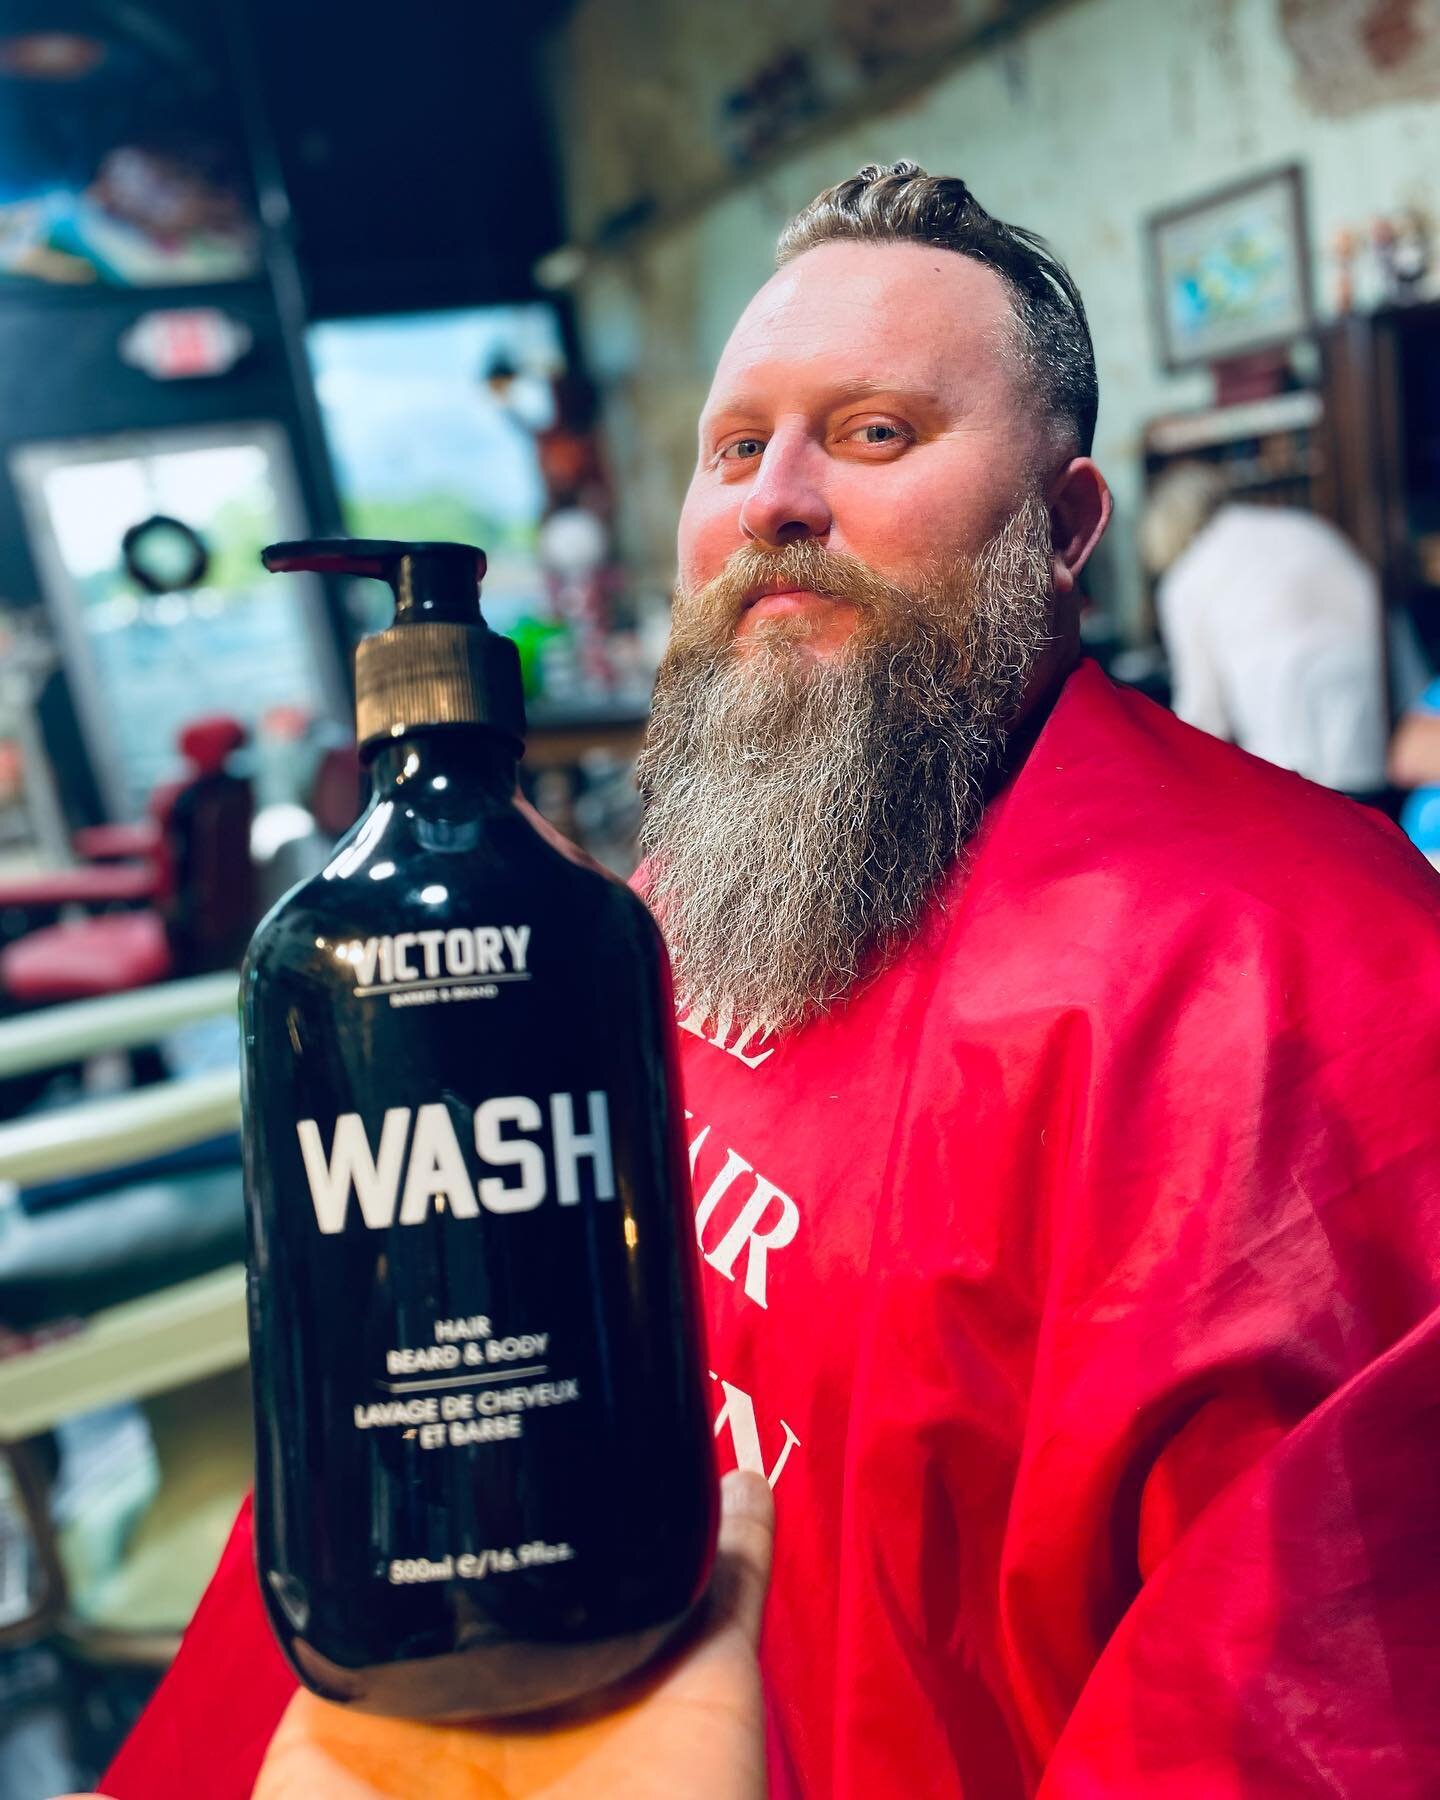 Bodies 😳correction ! Body Beard and hair WASH! WASH! 😂🤣🔁 available absolutely only the best we carry ! @wakeupbarbershop #barbershopconect #shoplocal #barberlifestyle